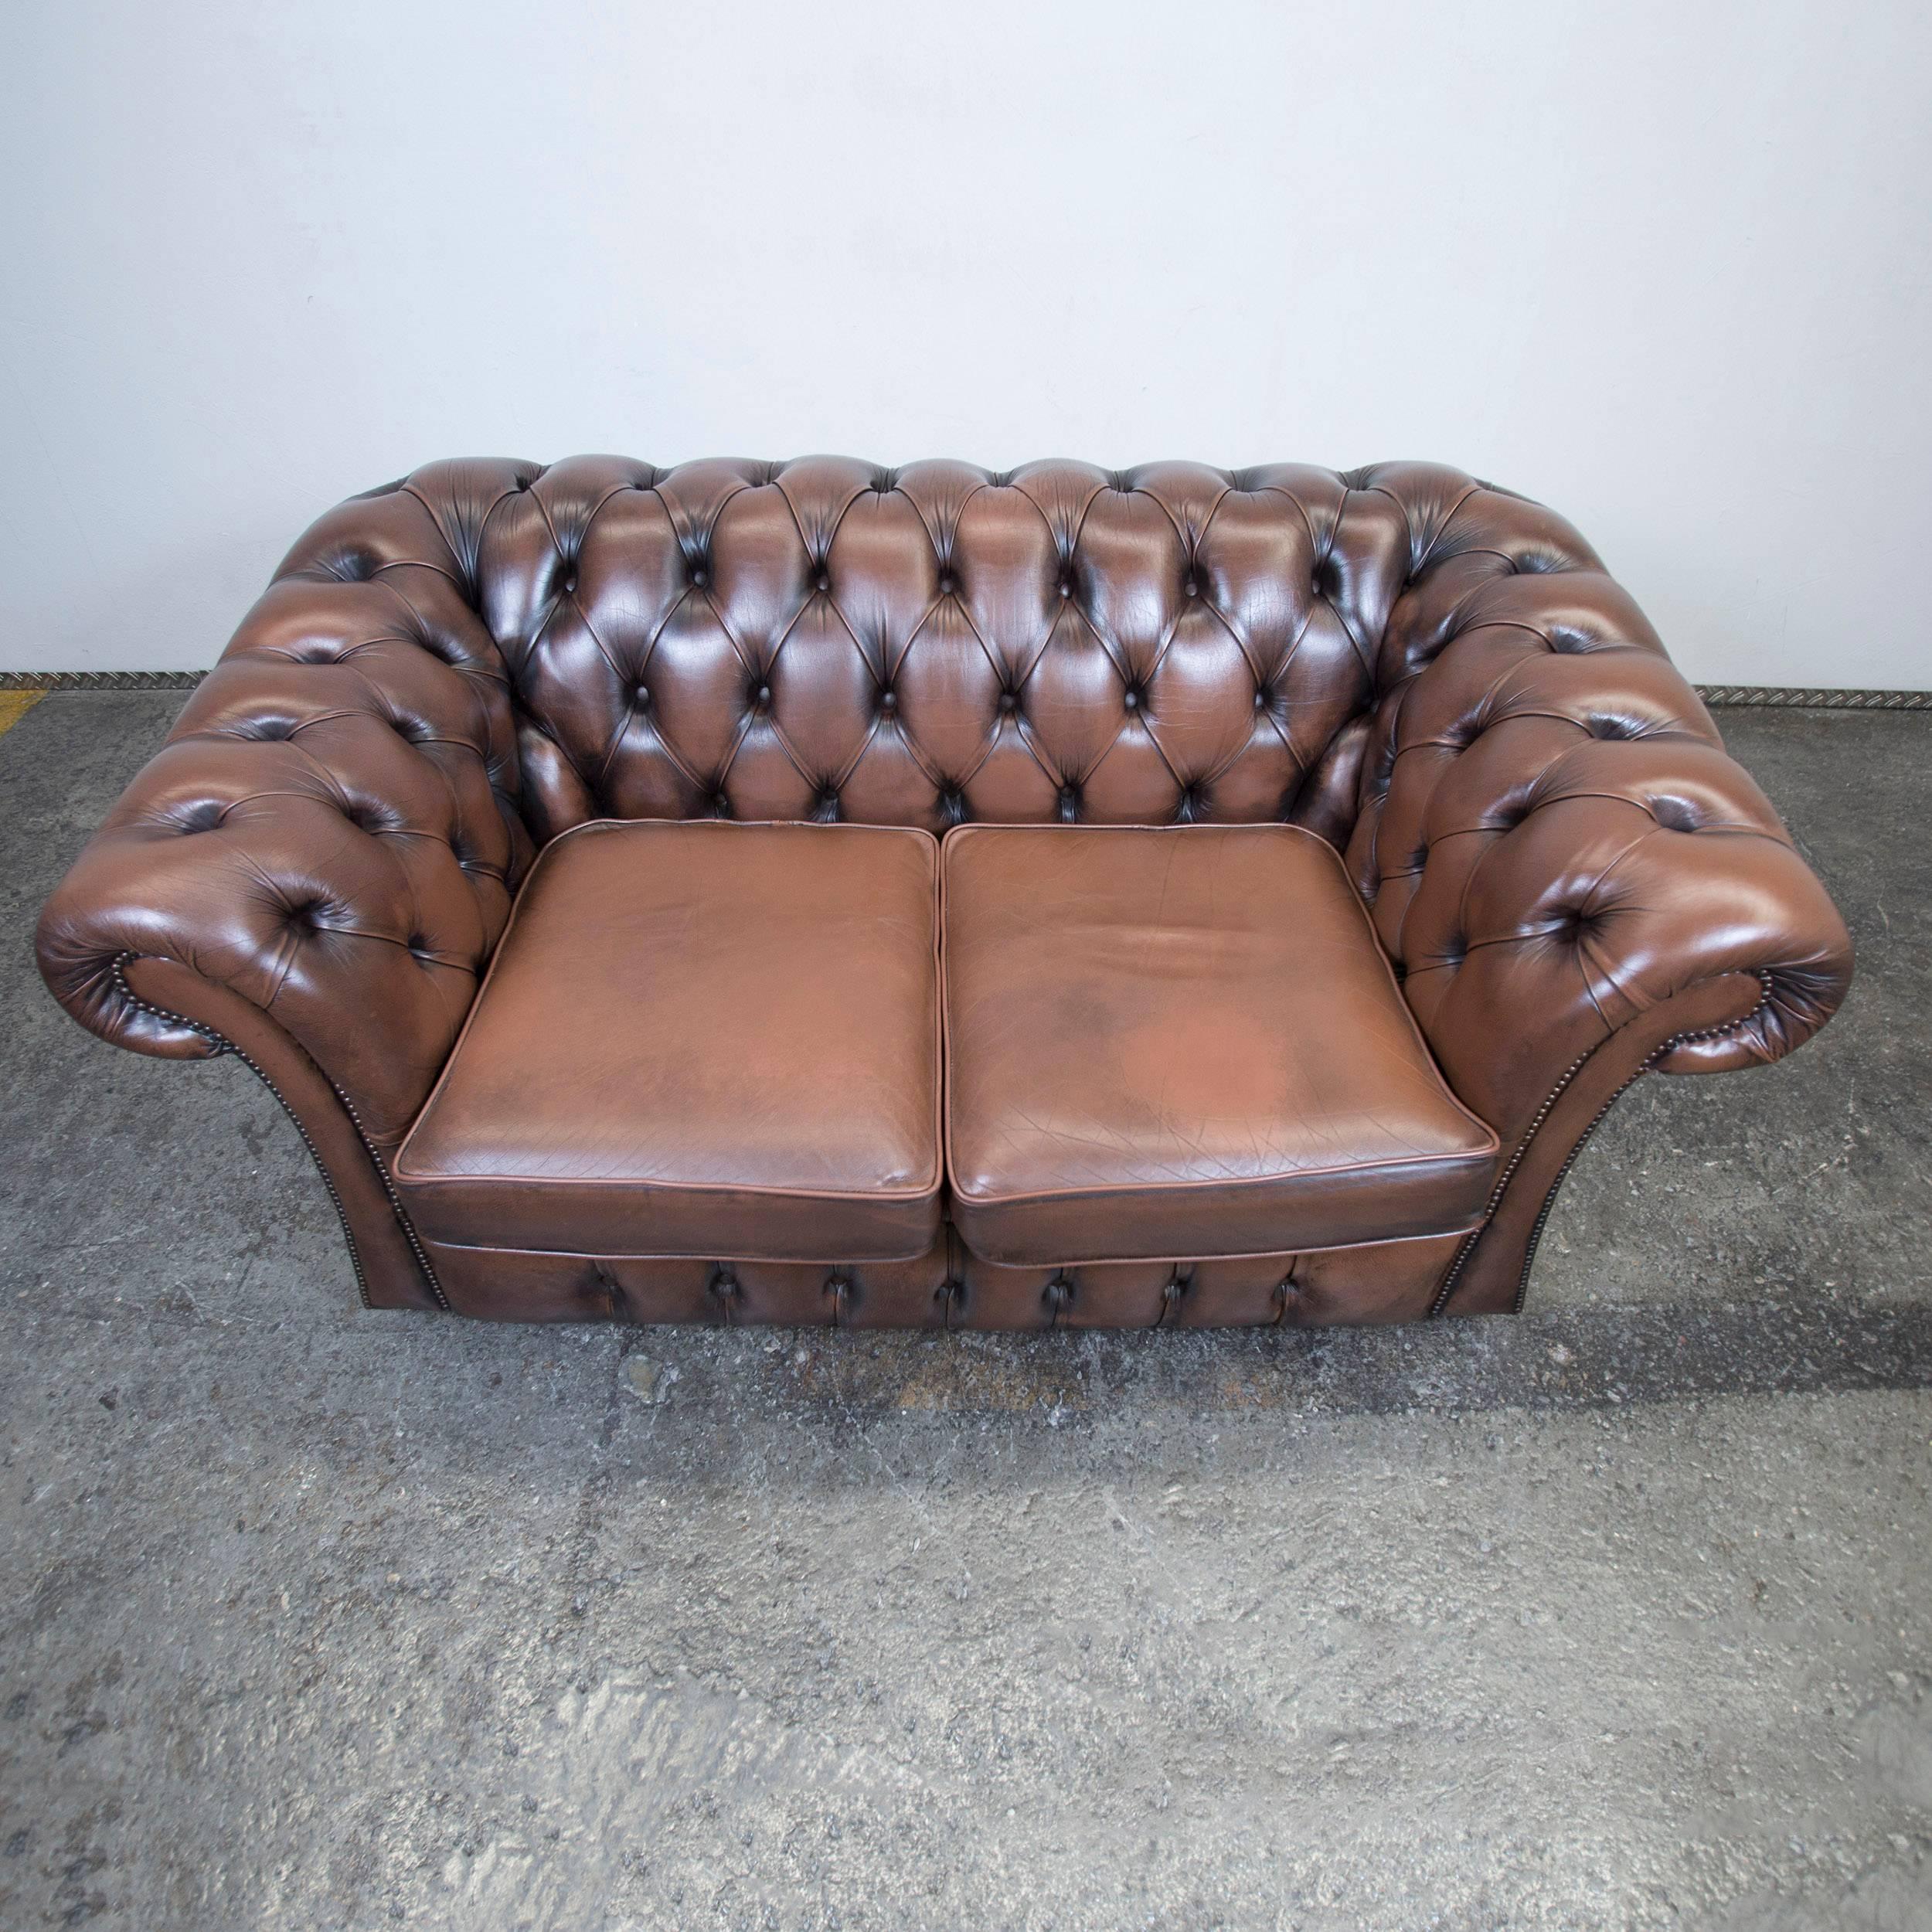 20th Century Chesterfield Leather Sofa Brown Two-Seat Couch Retro Vintage